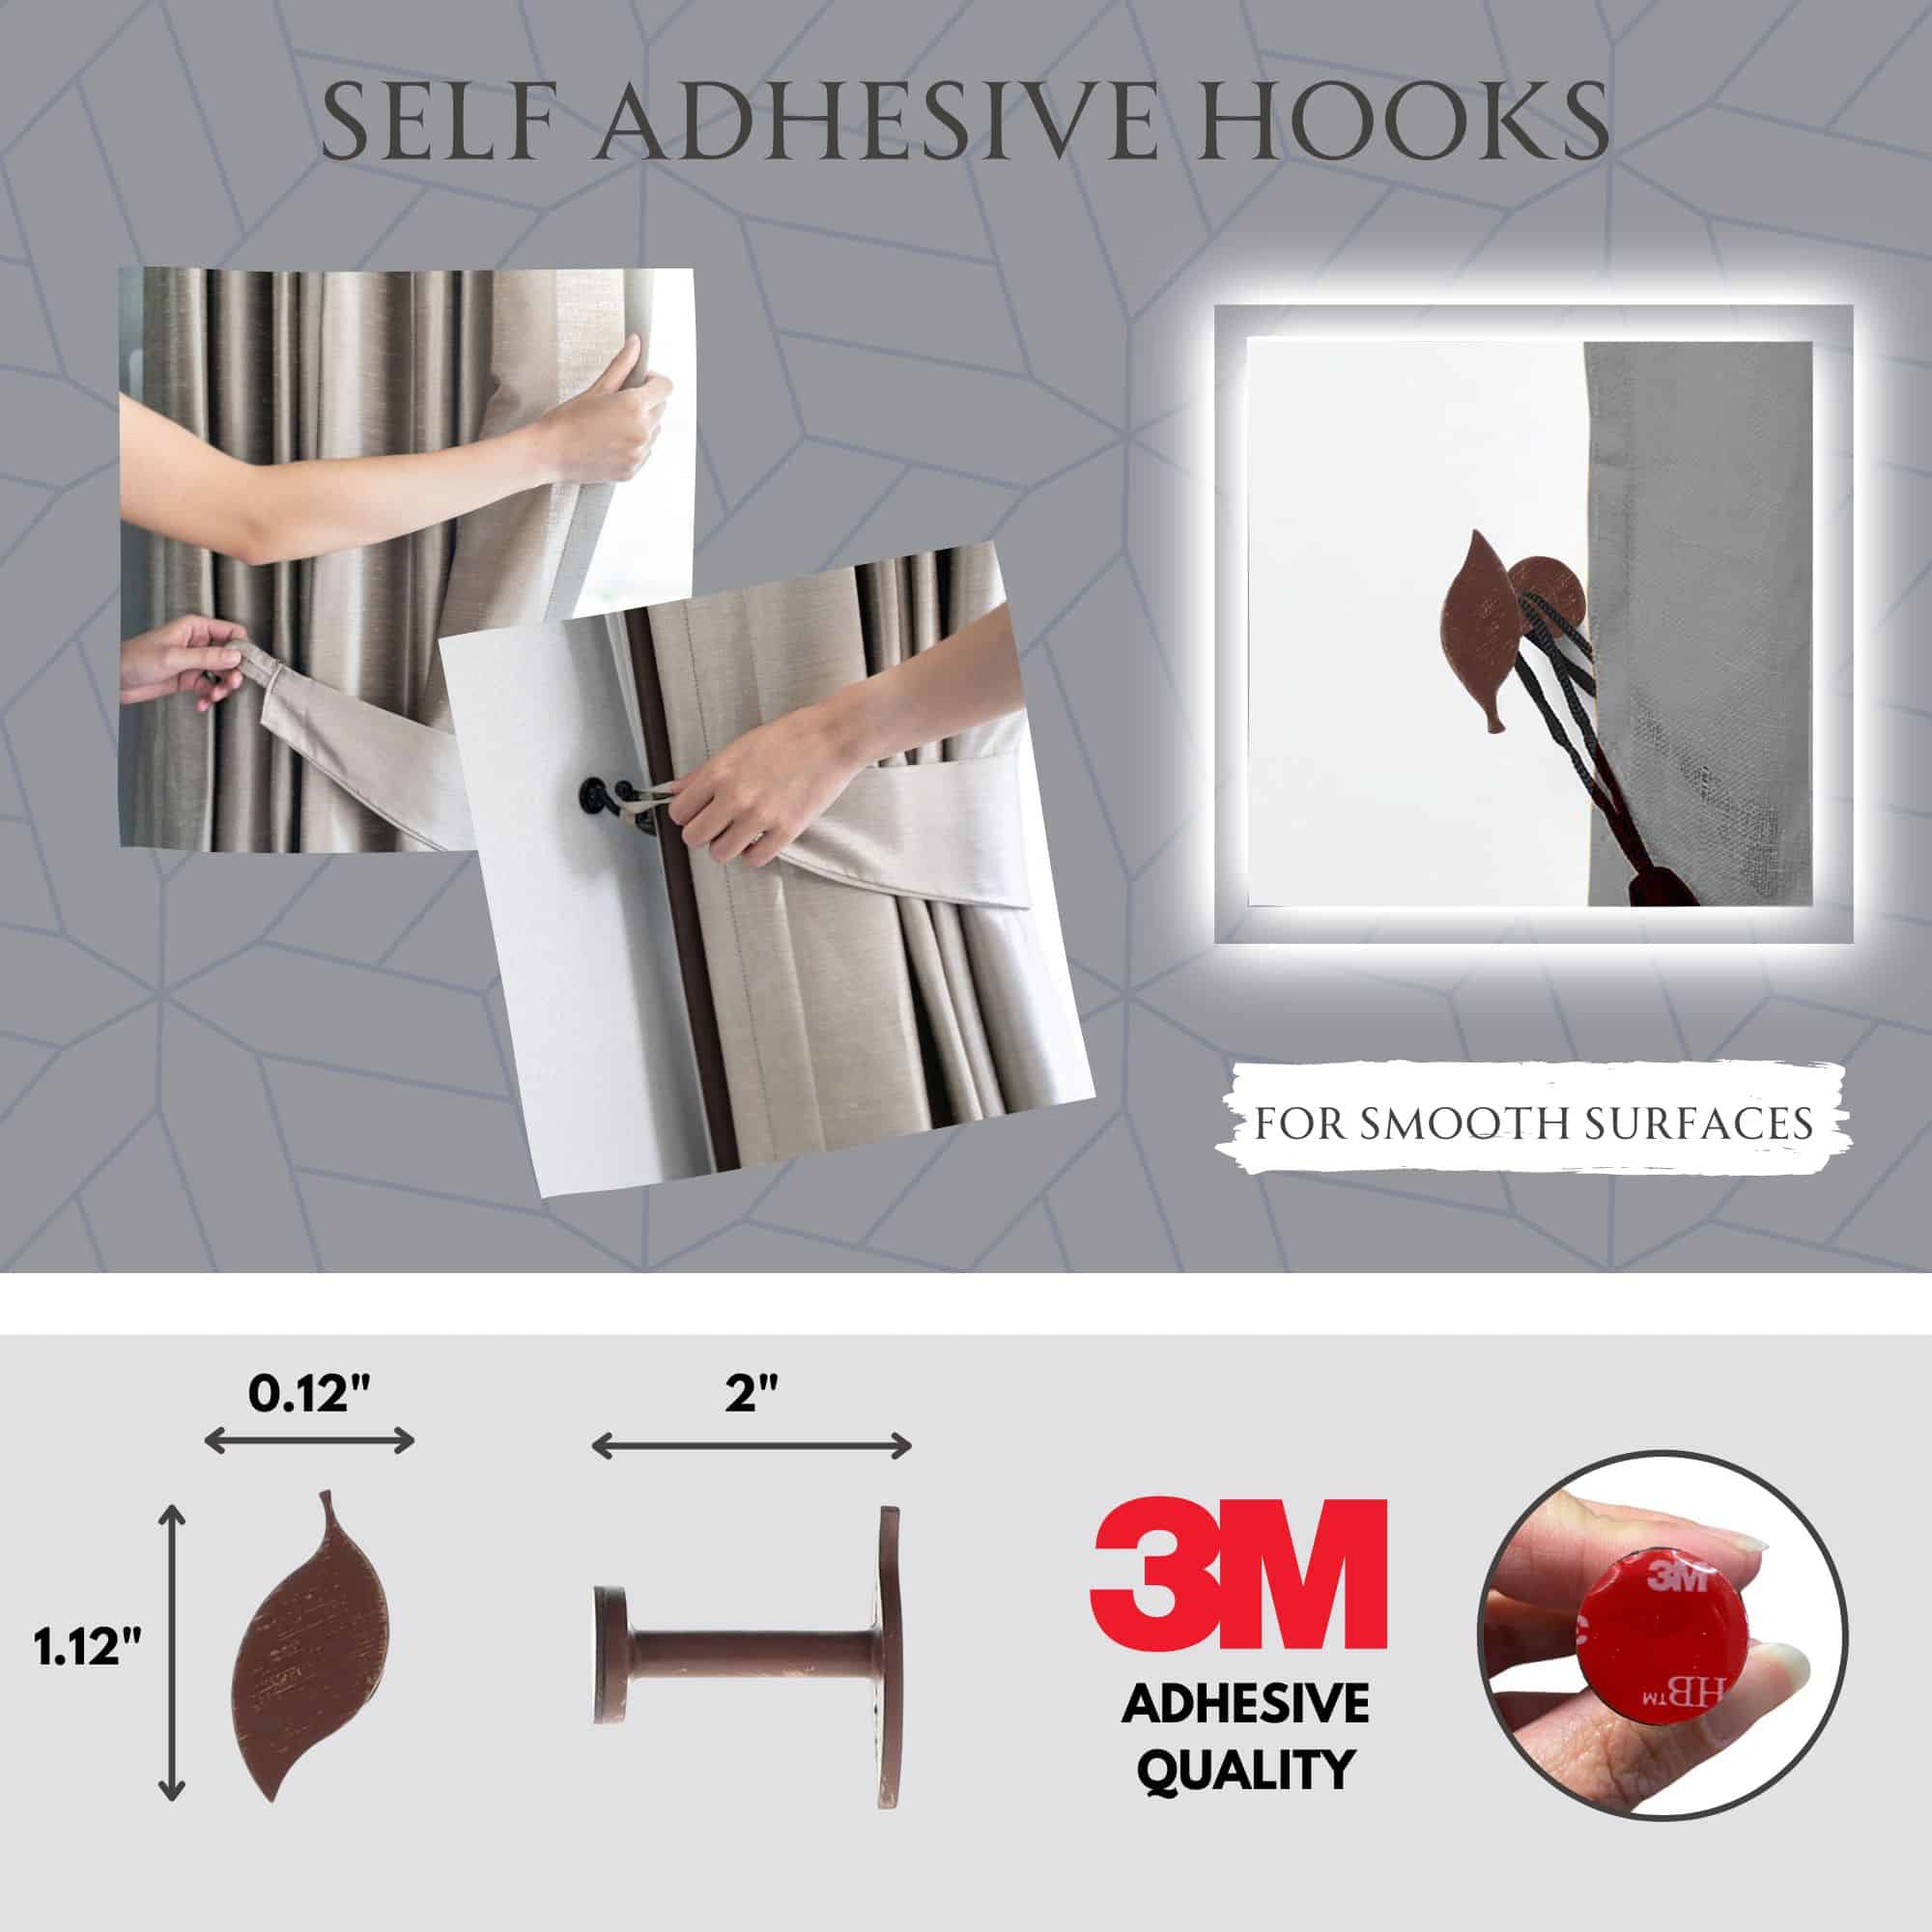 self adhesive hooks x 2 for smooth surfaces with 3M adhesive quality